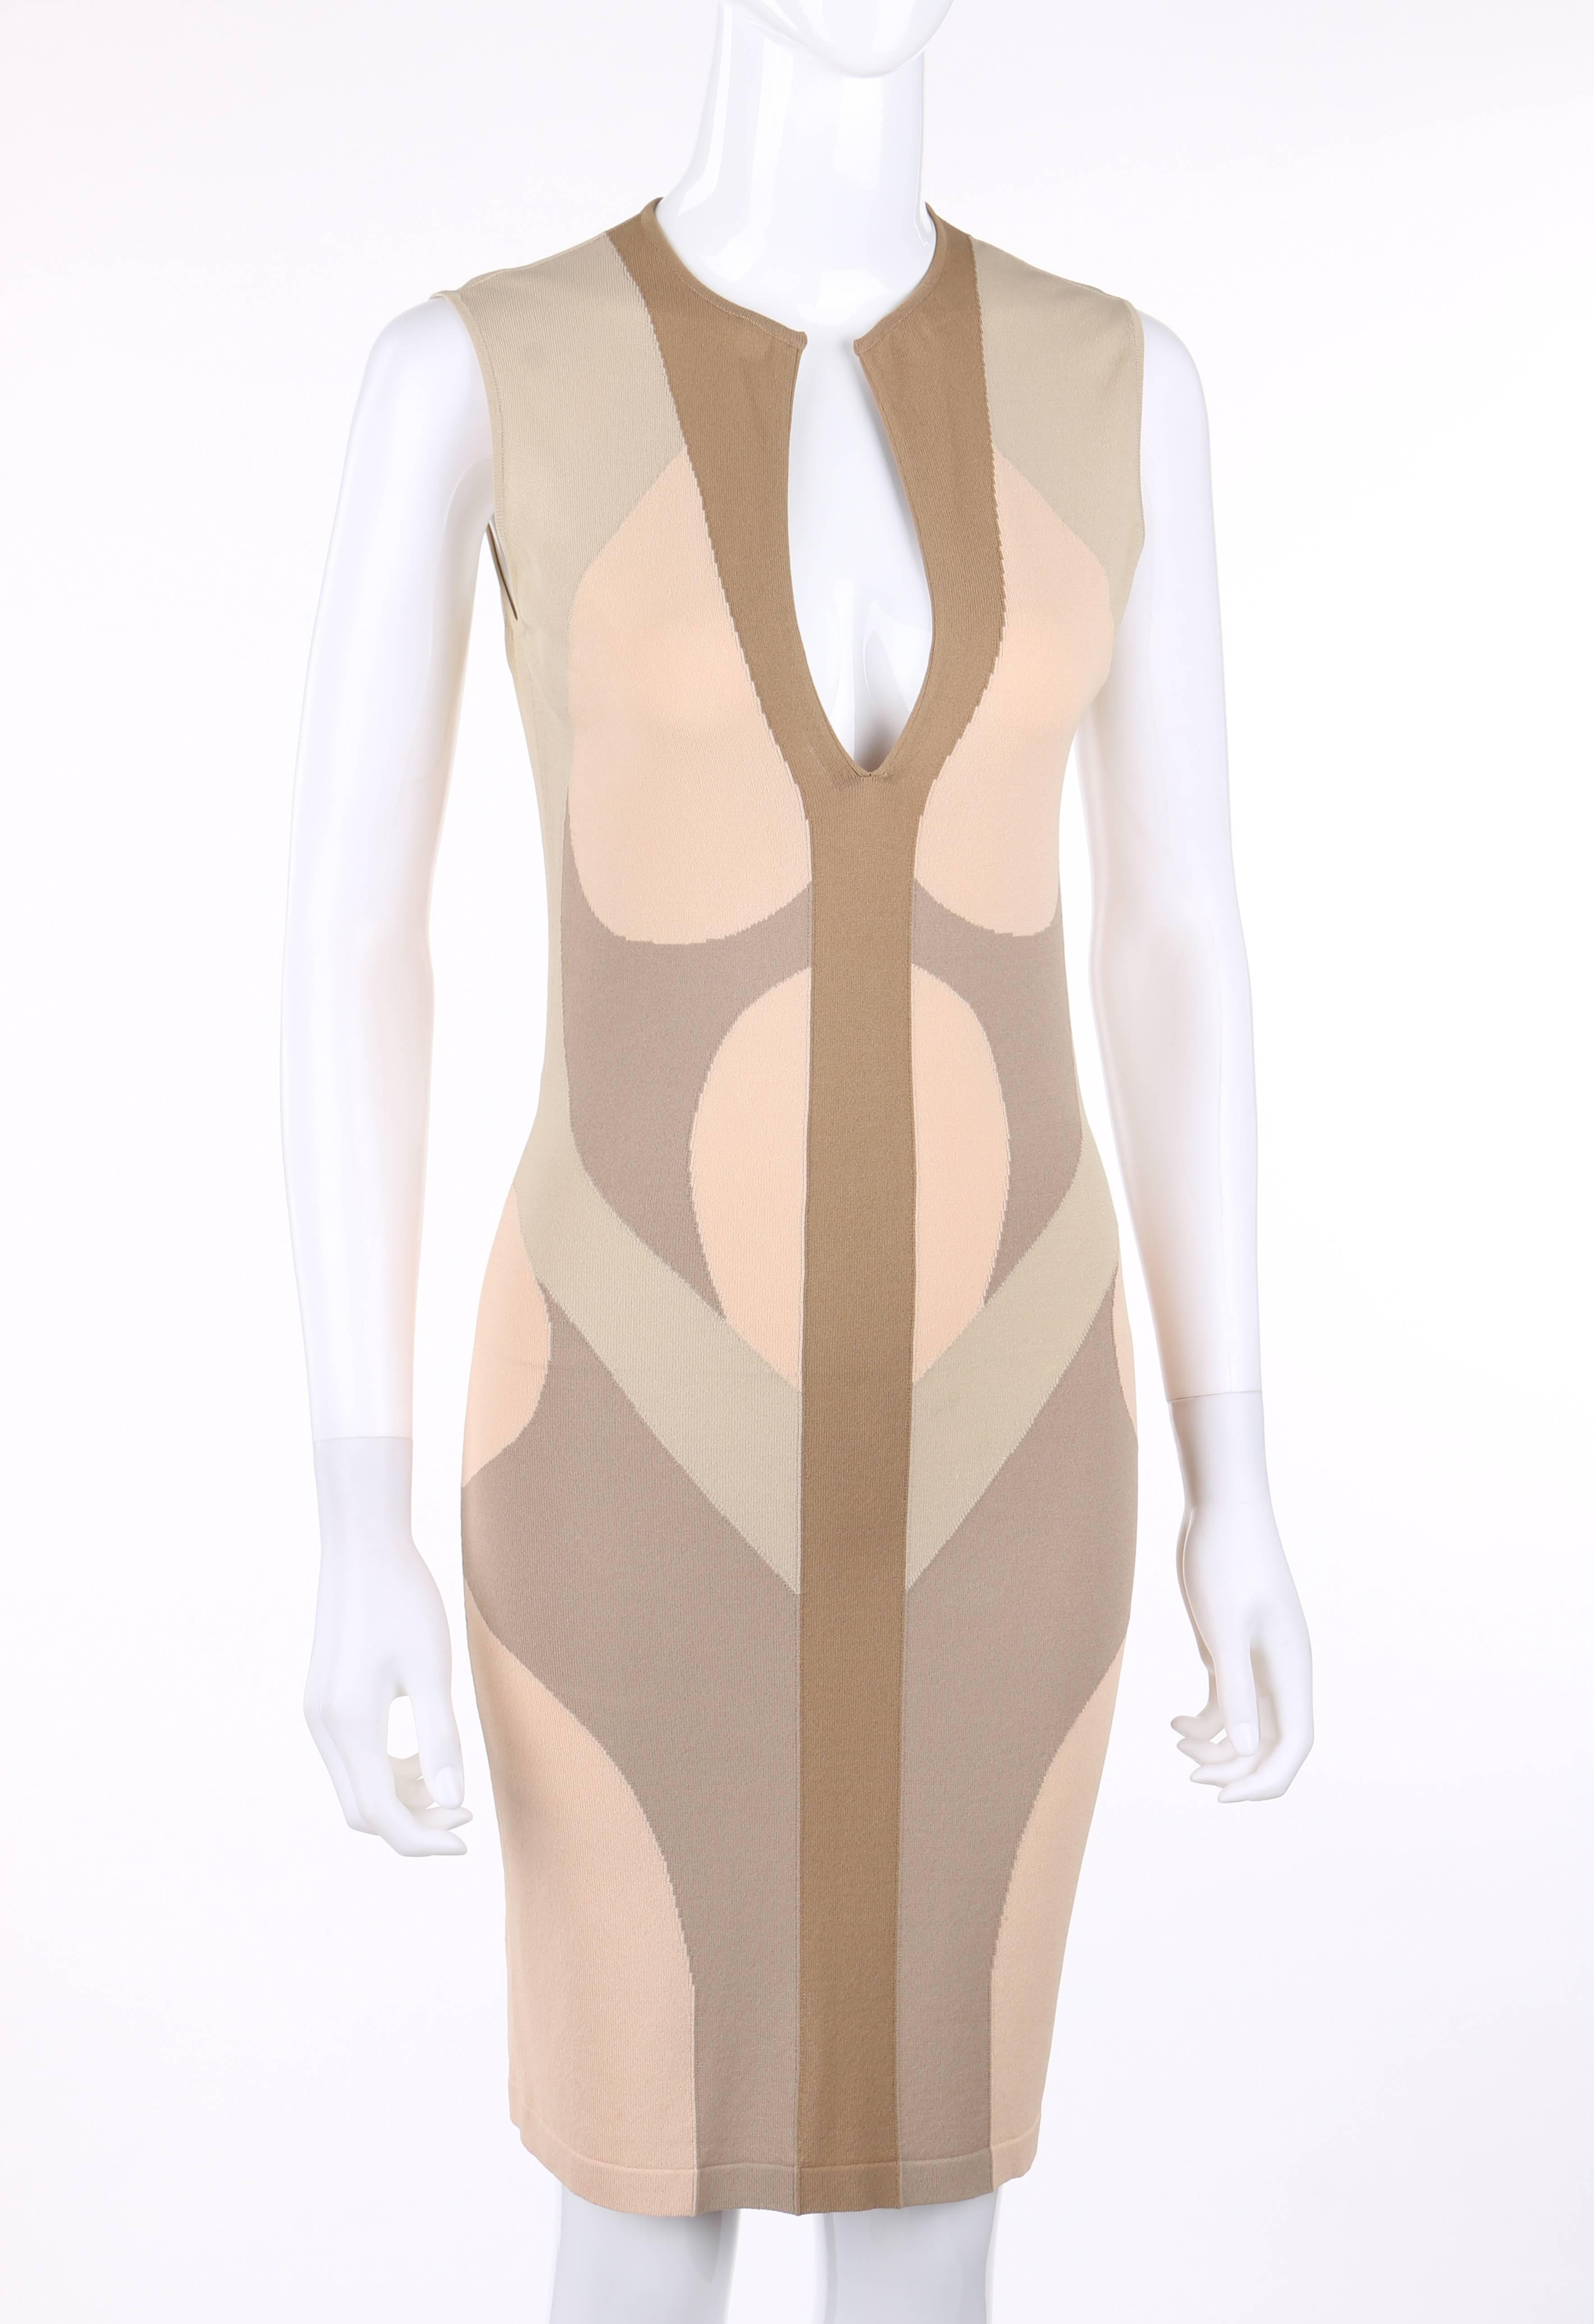 Alexander McQueen Resort 2009 multicolor colorblock sheath dress in shades of beige, gray, and tan. Low keyhole neckline. Sleeveless. Slip-on style. Marked Fabric Content: 